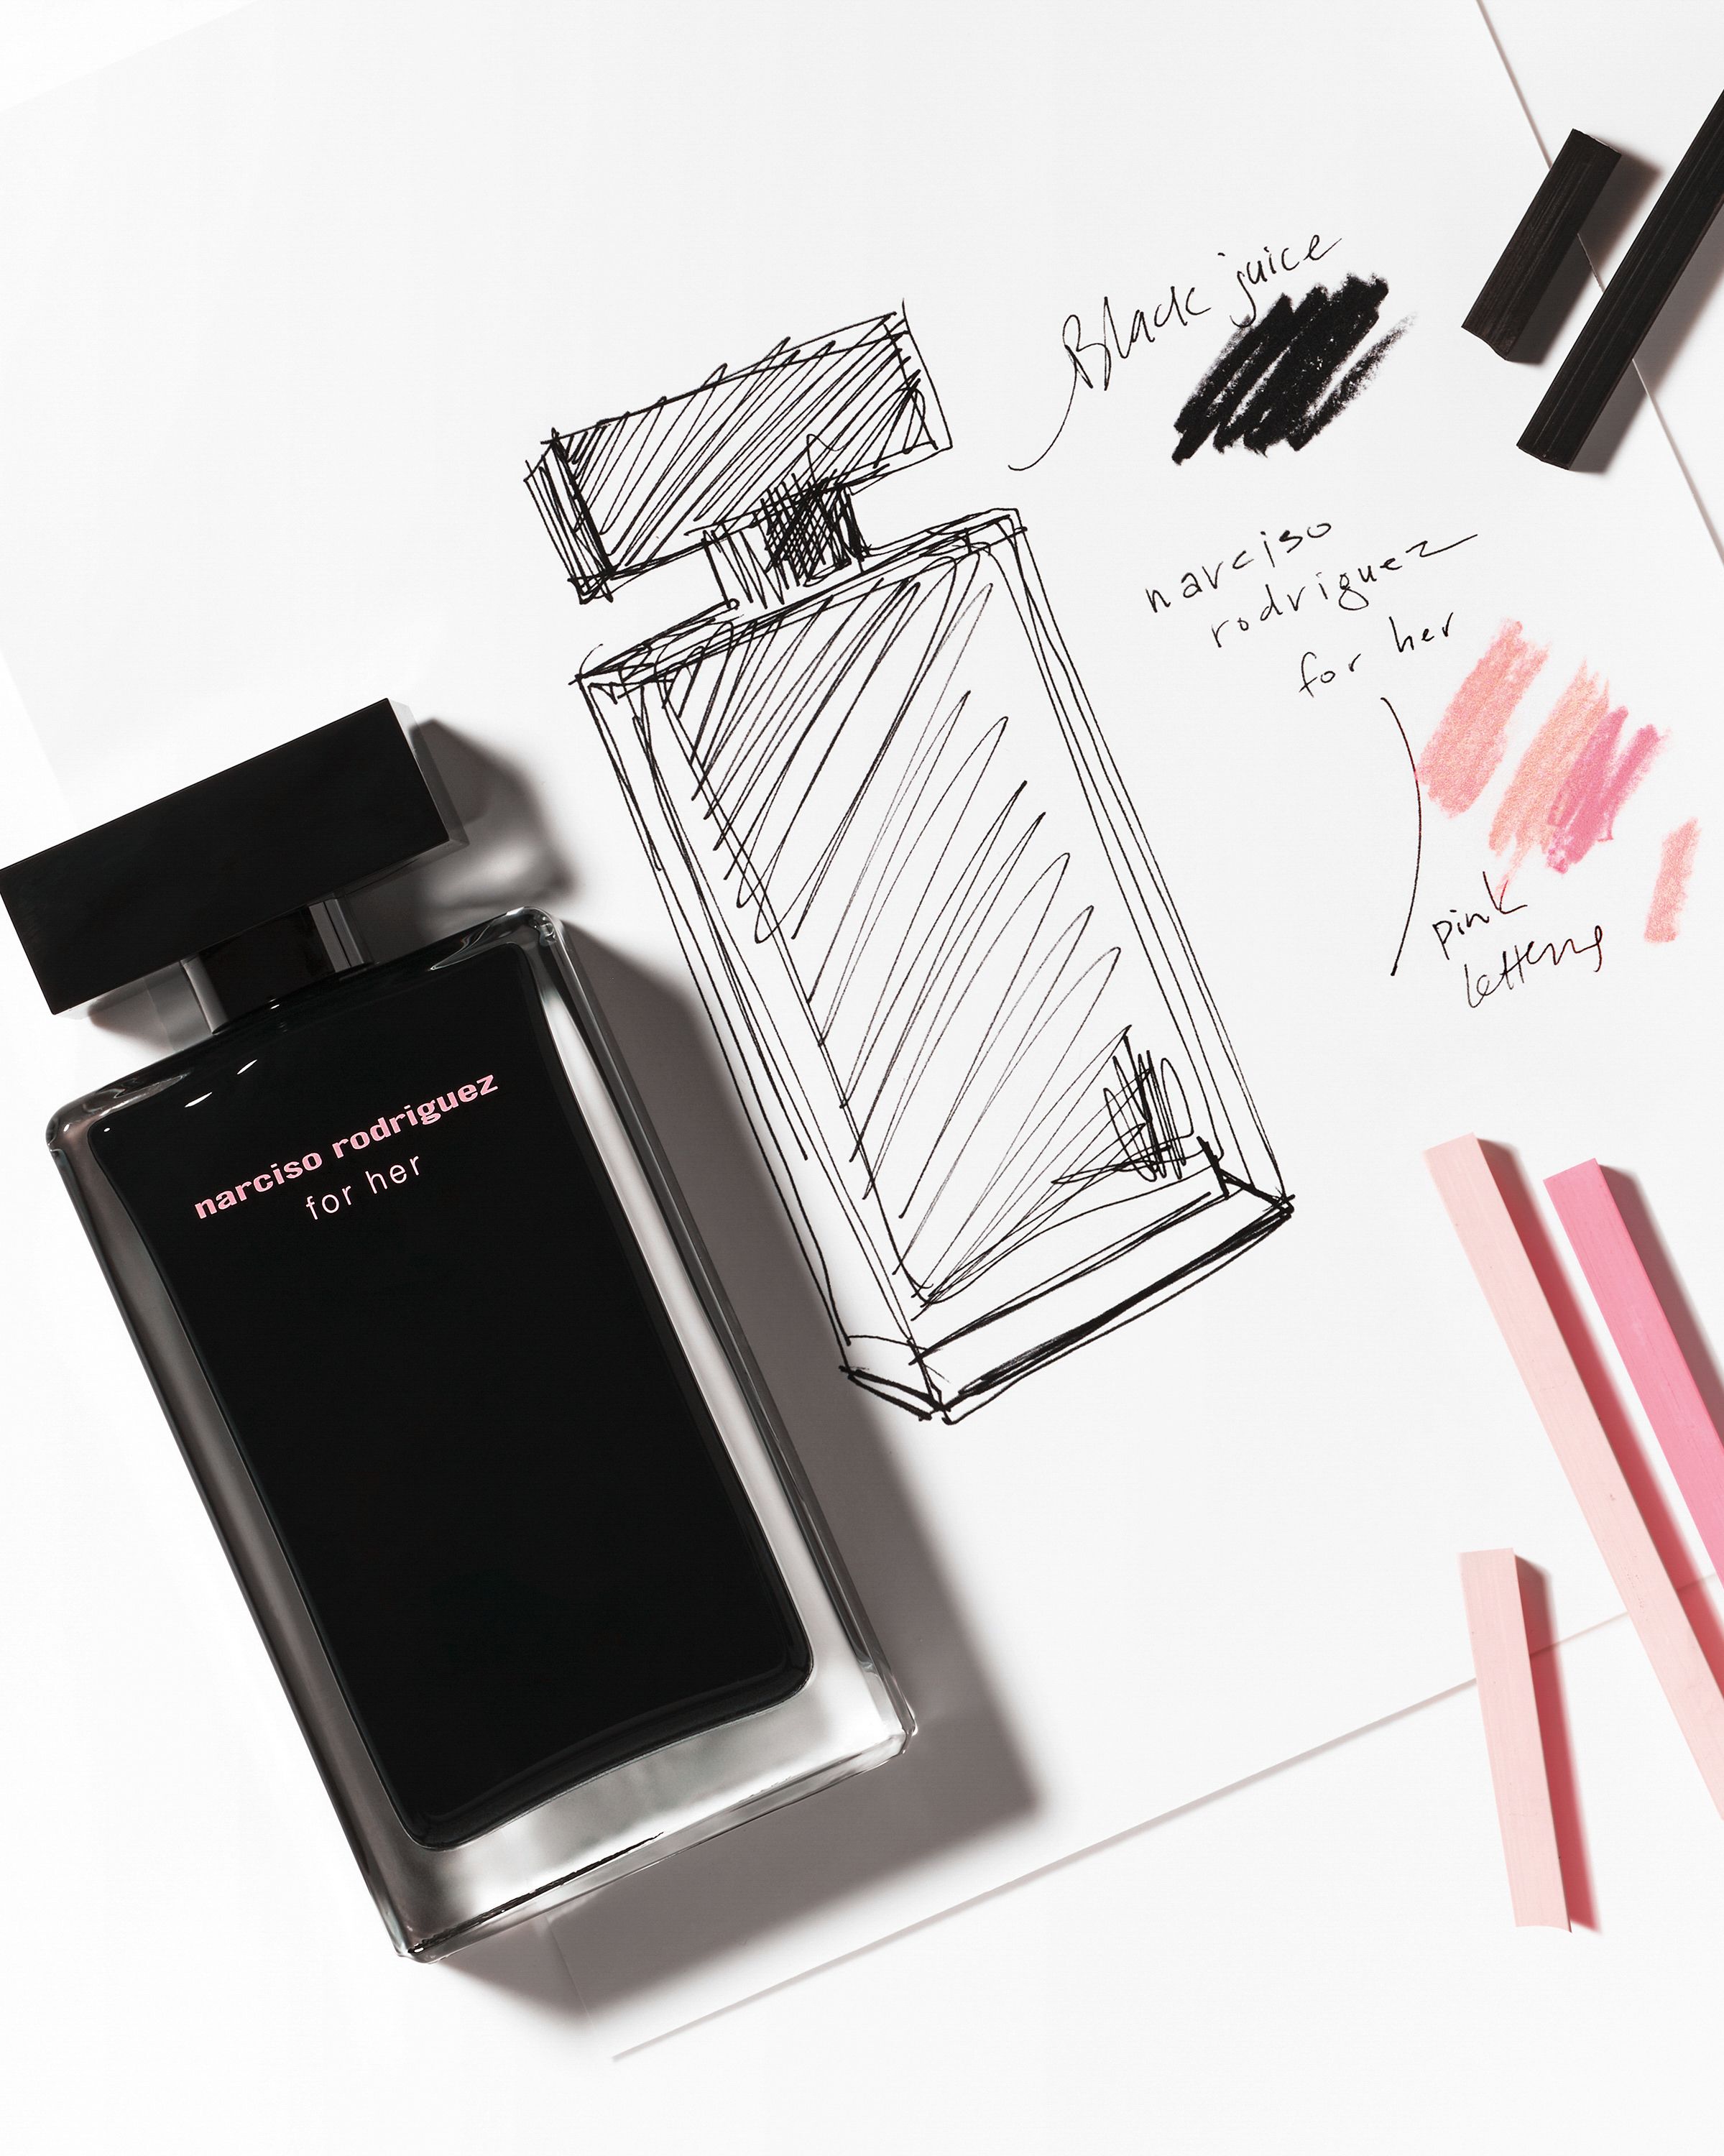 The history of Narciso Rodriguez for Her perfume